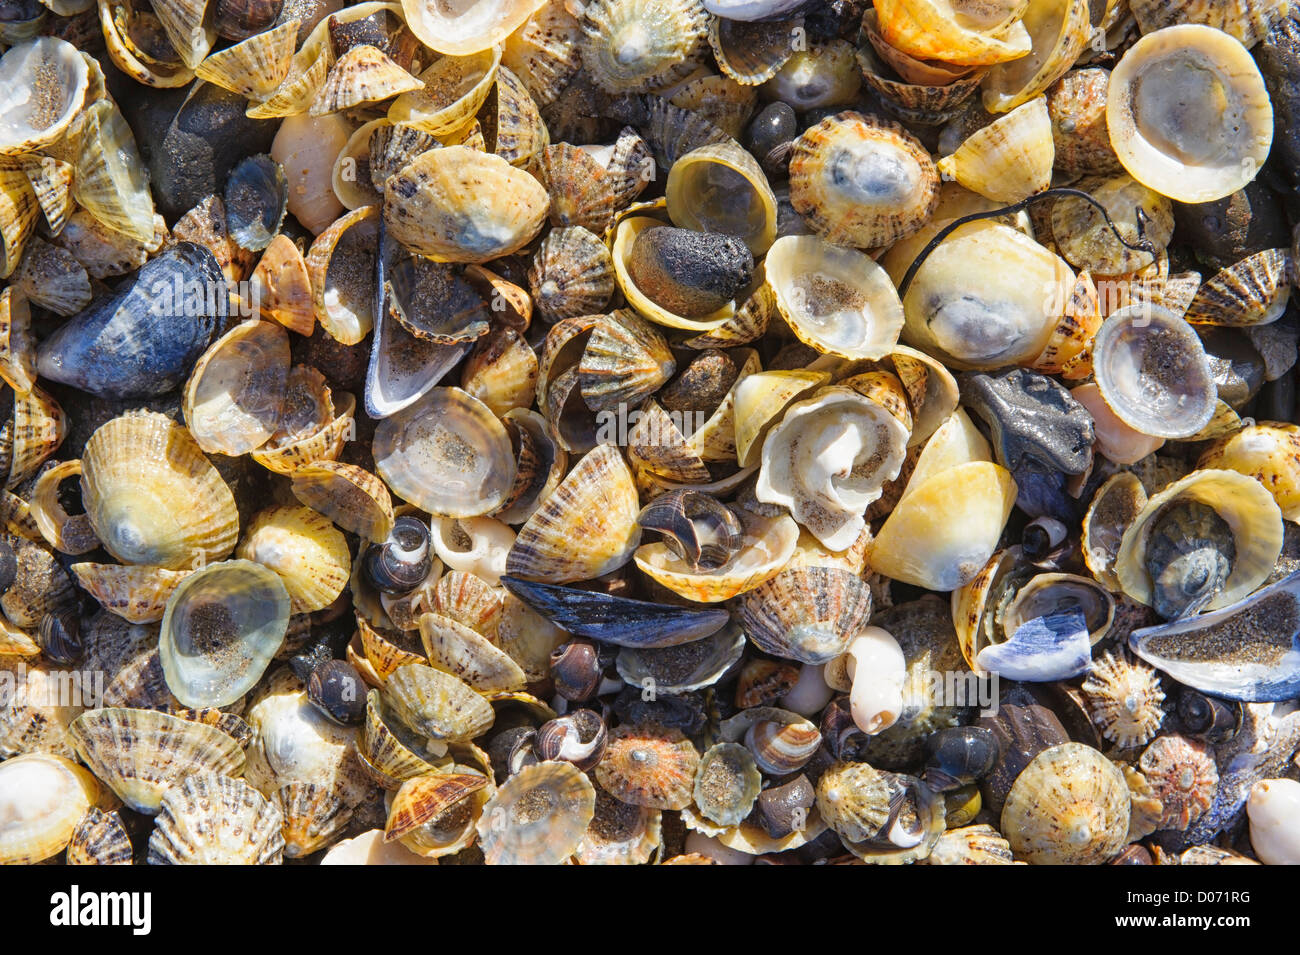 Limpet and mussel shells on a beach in Scotland. Stock Photo